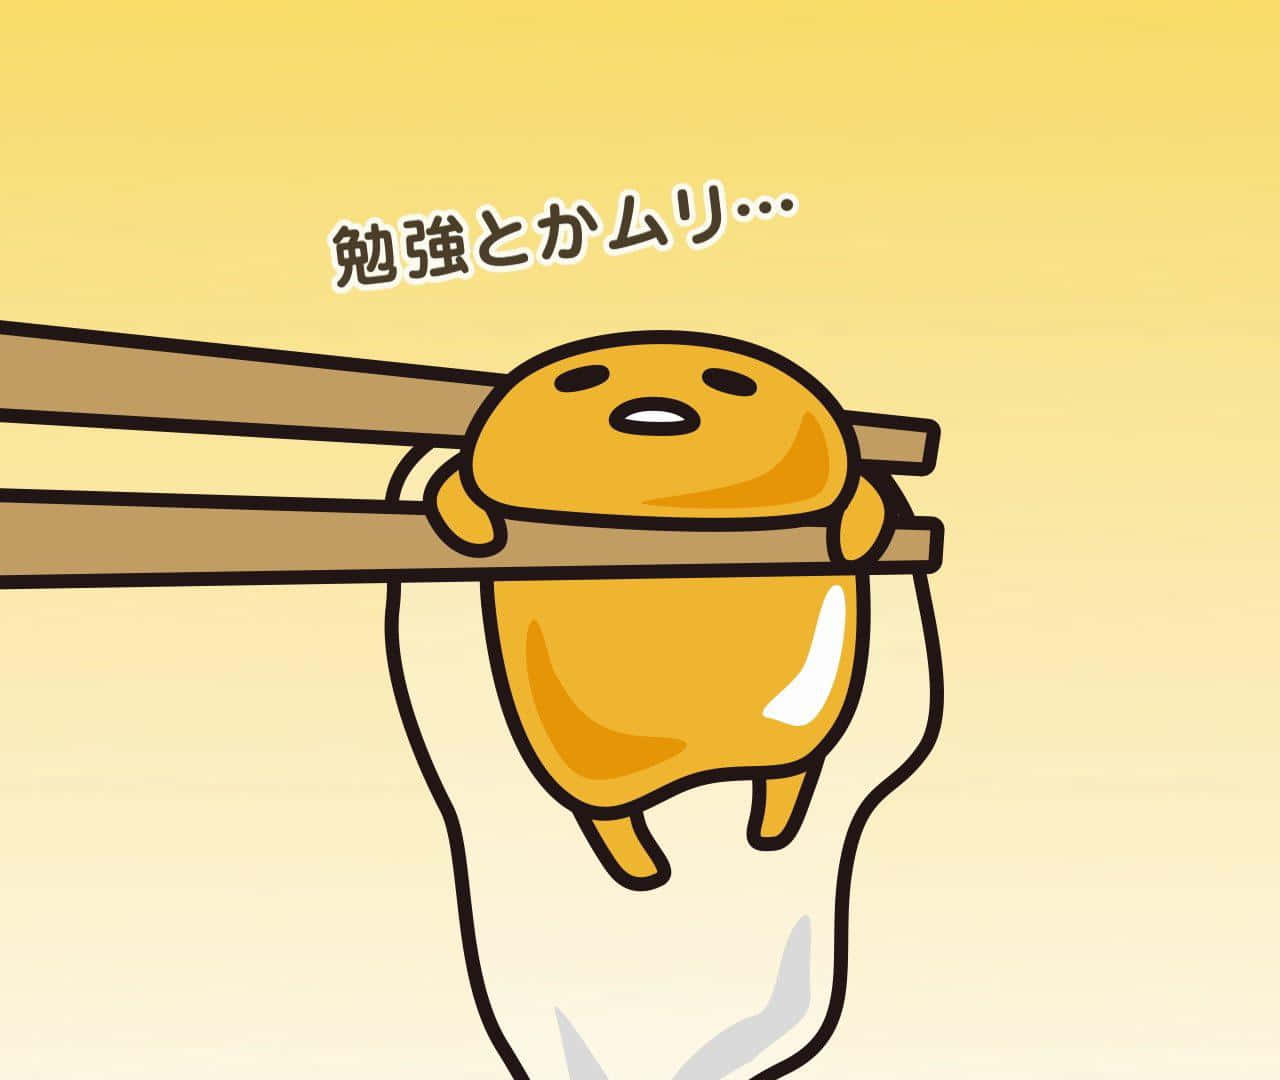 "Gudetama is ready to work hard on the computer!" Wallpaper